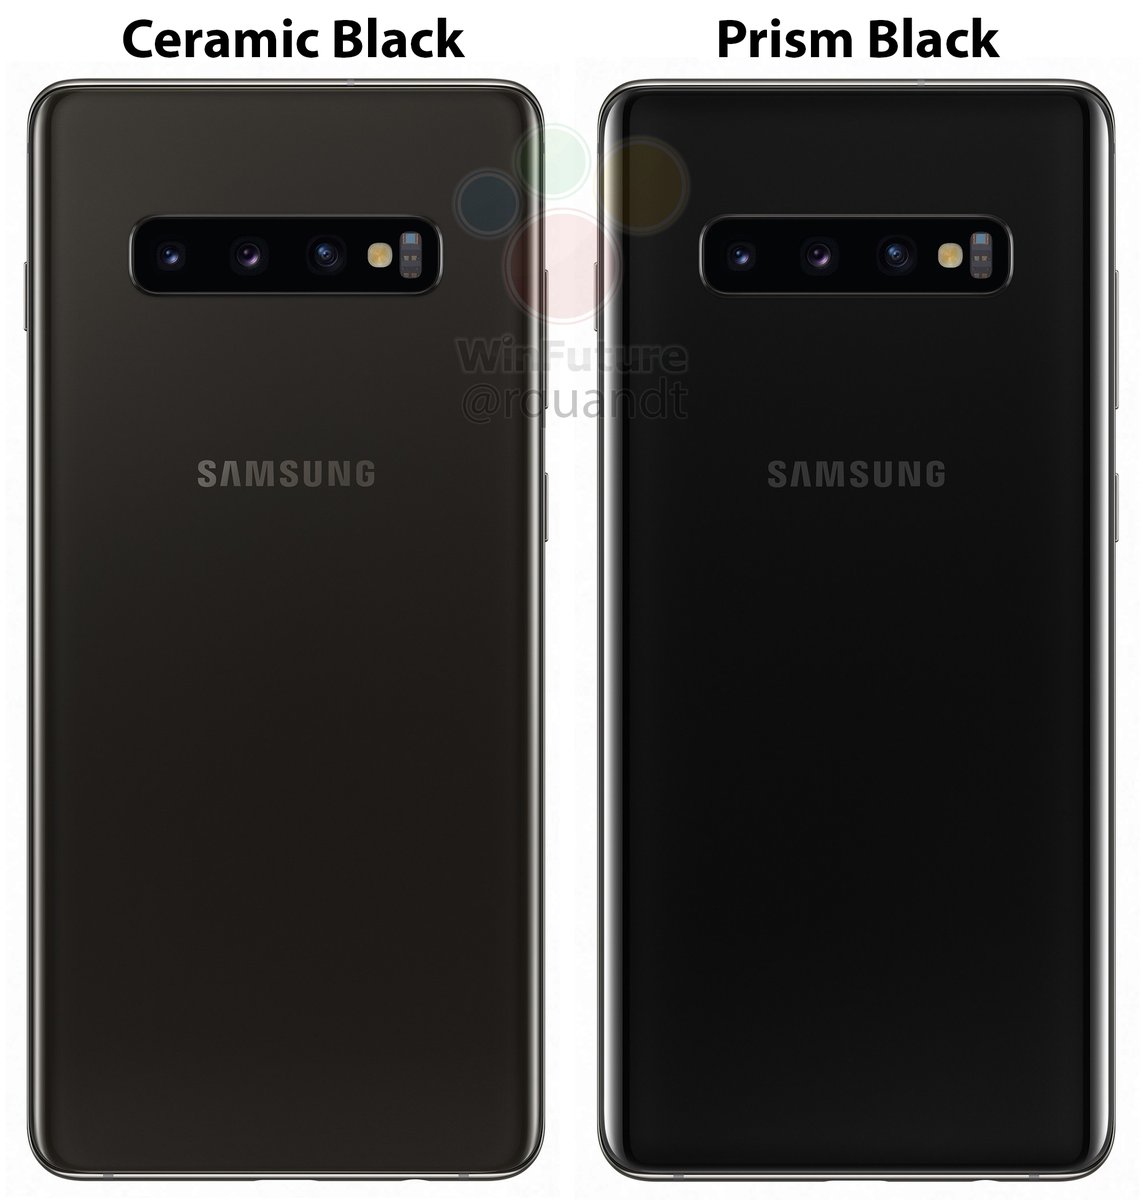 Galaxy S10 In Luxurious Ceramic White Revealed In Leaked Render